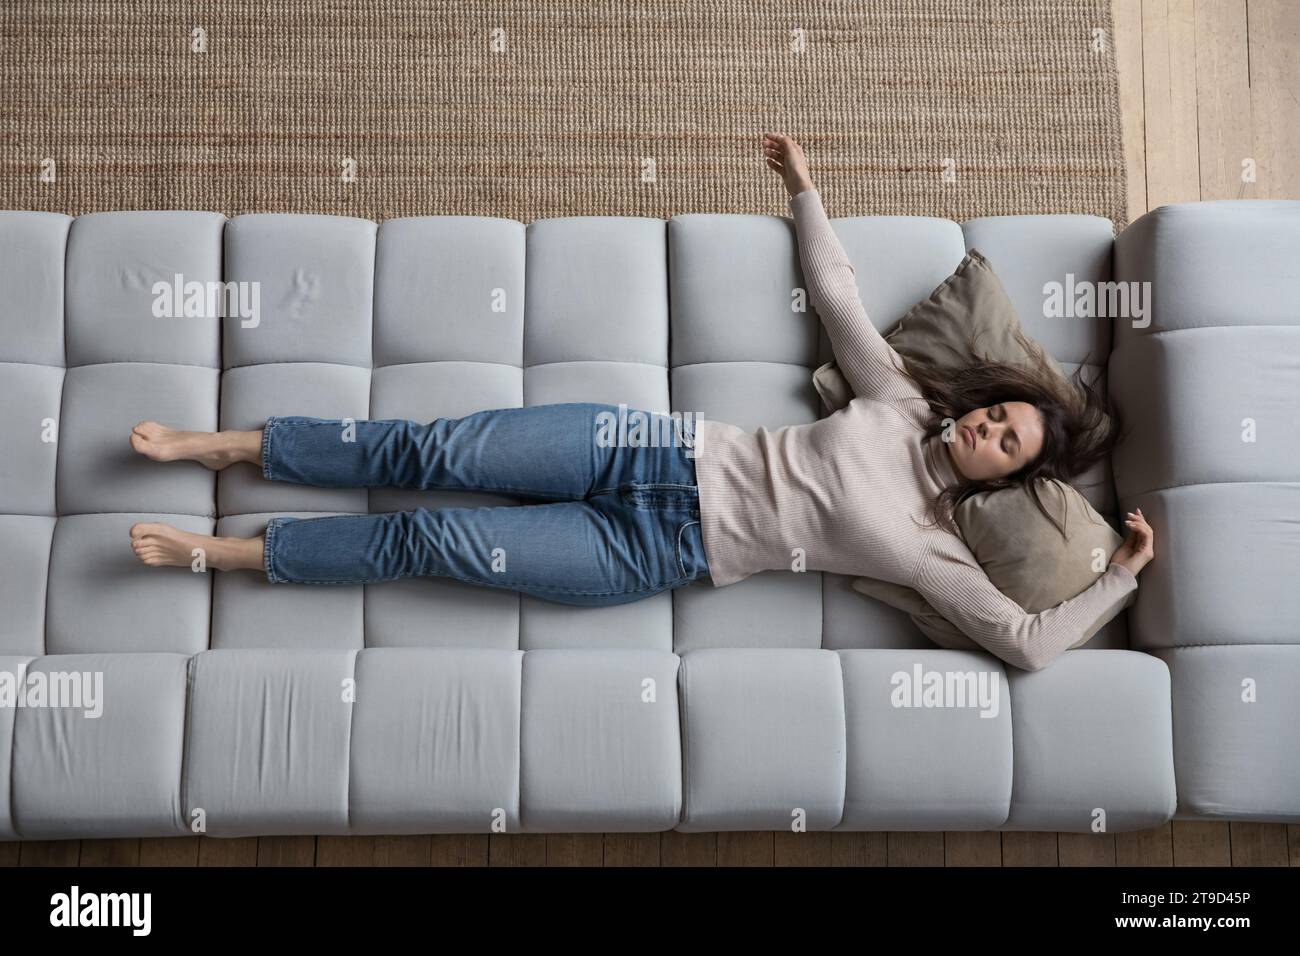 Young exhausted woman sleeping on sofa, above view Stock Photo